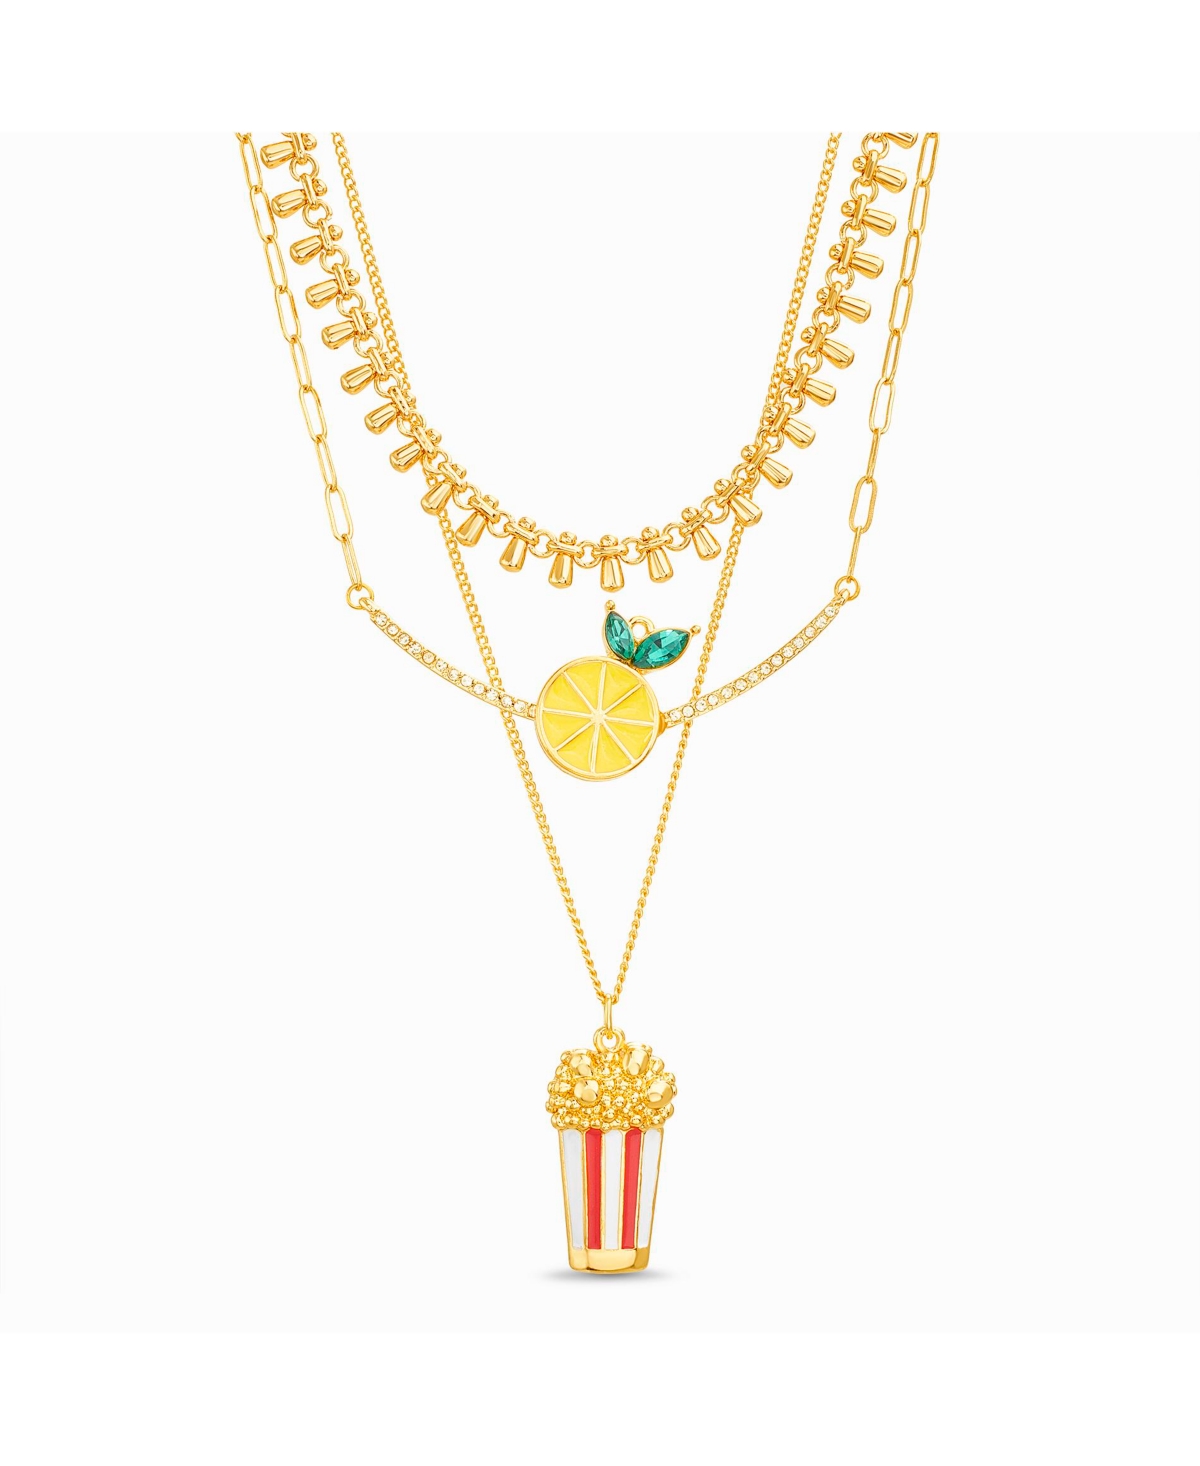 3-Pc Mixed Chain Necklace with Lemon and Popcorn Charms - Multi